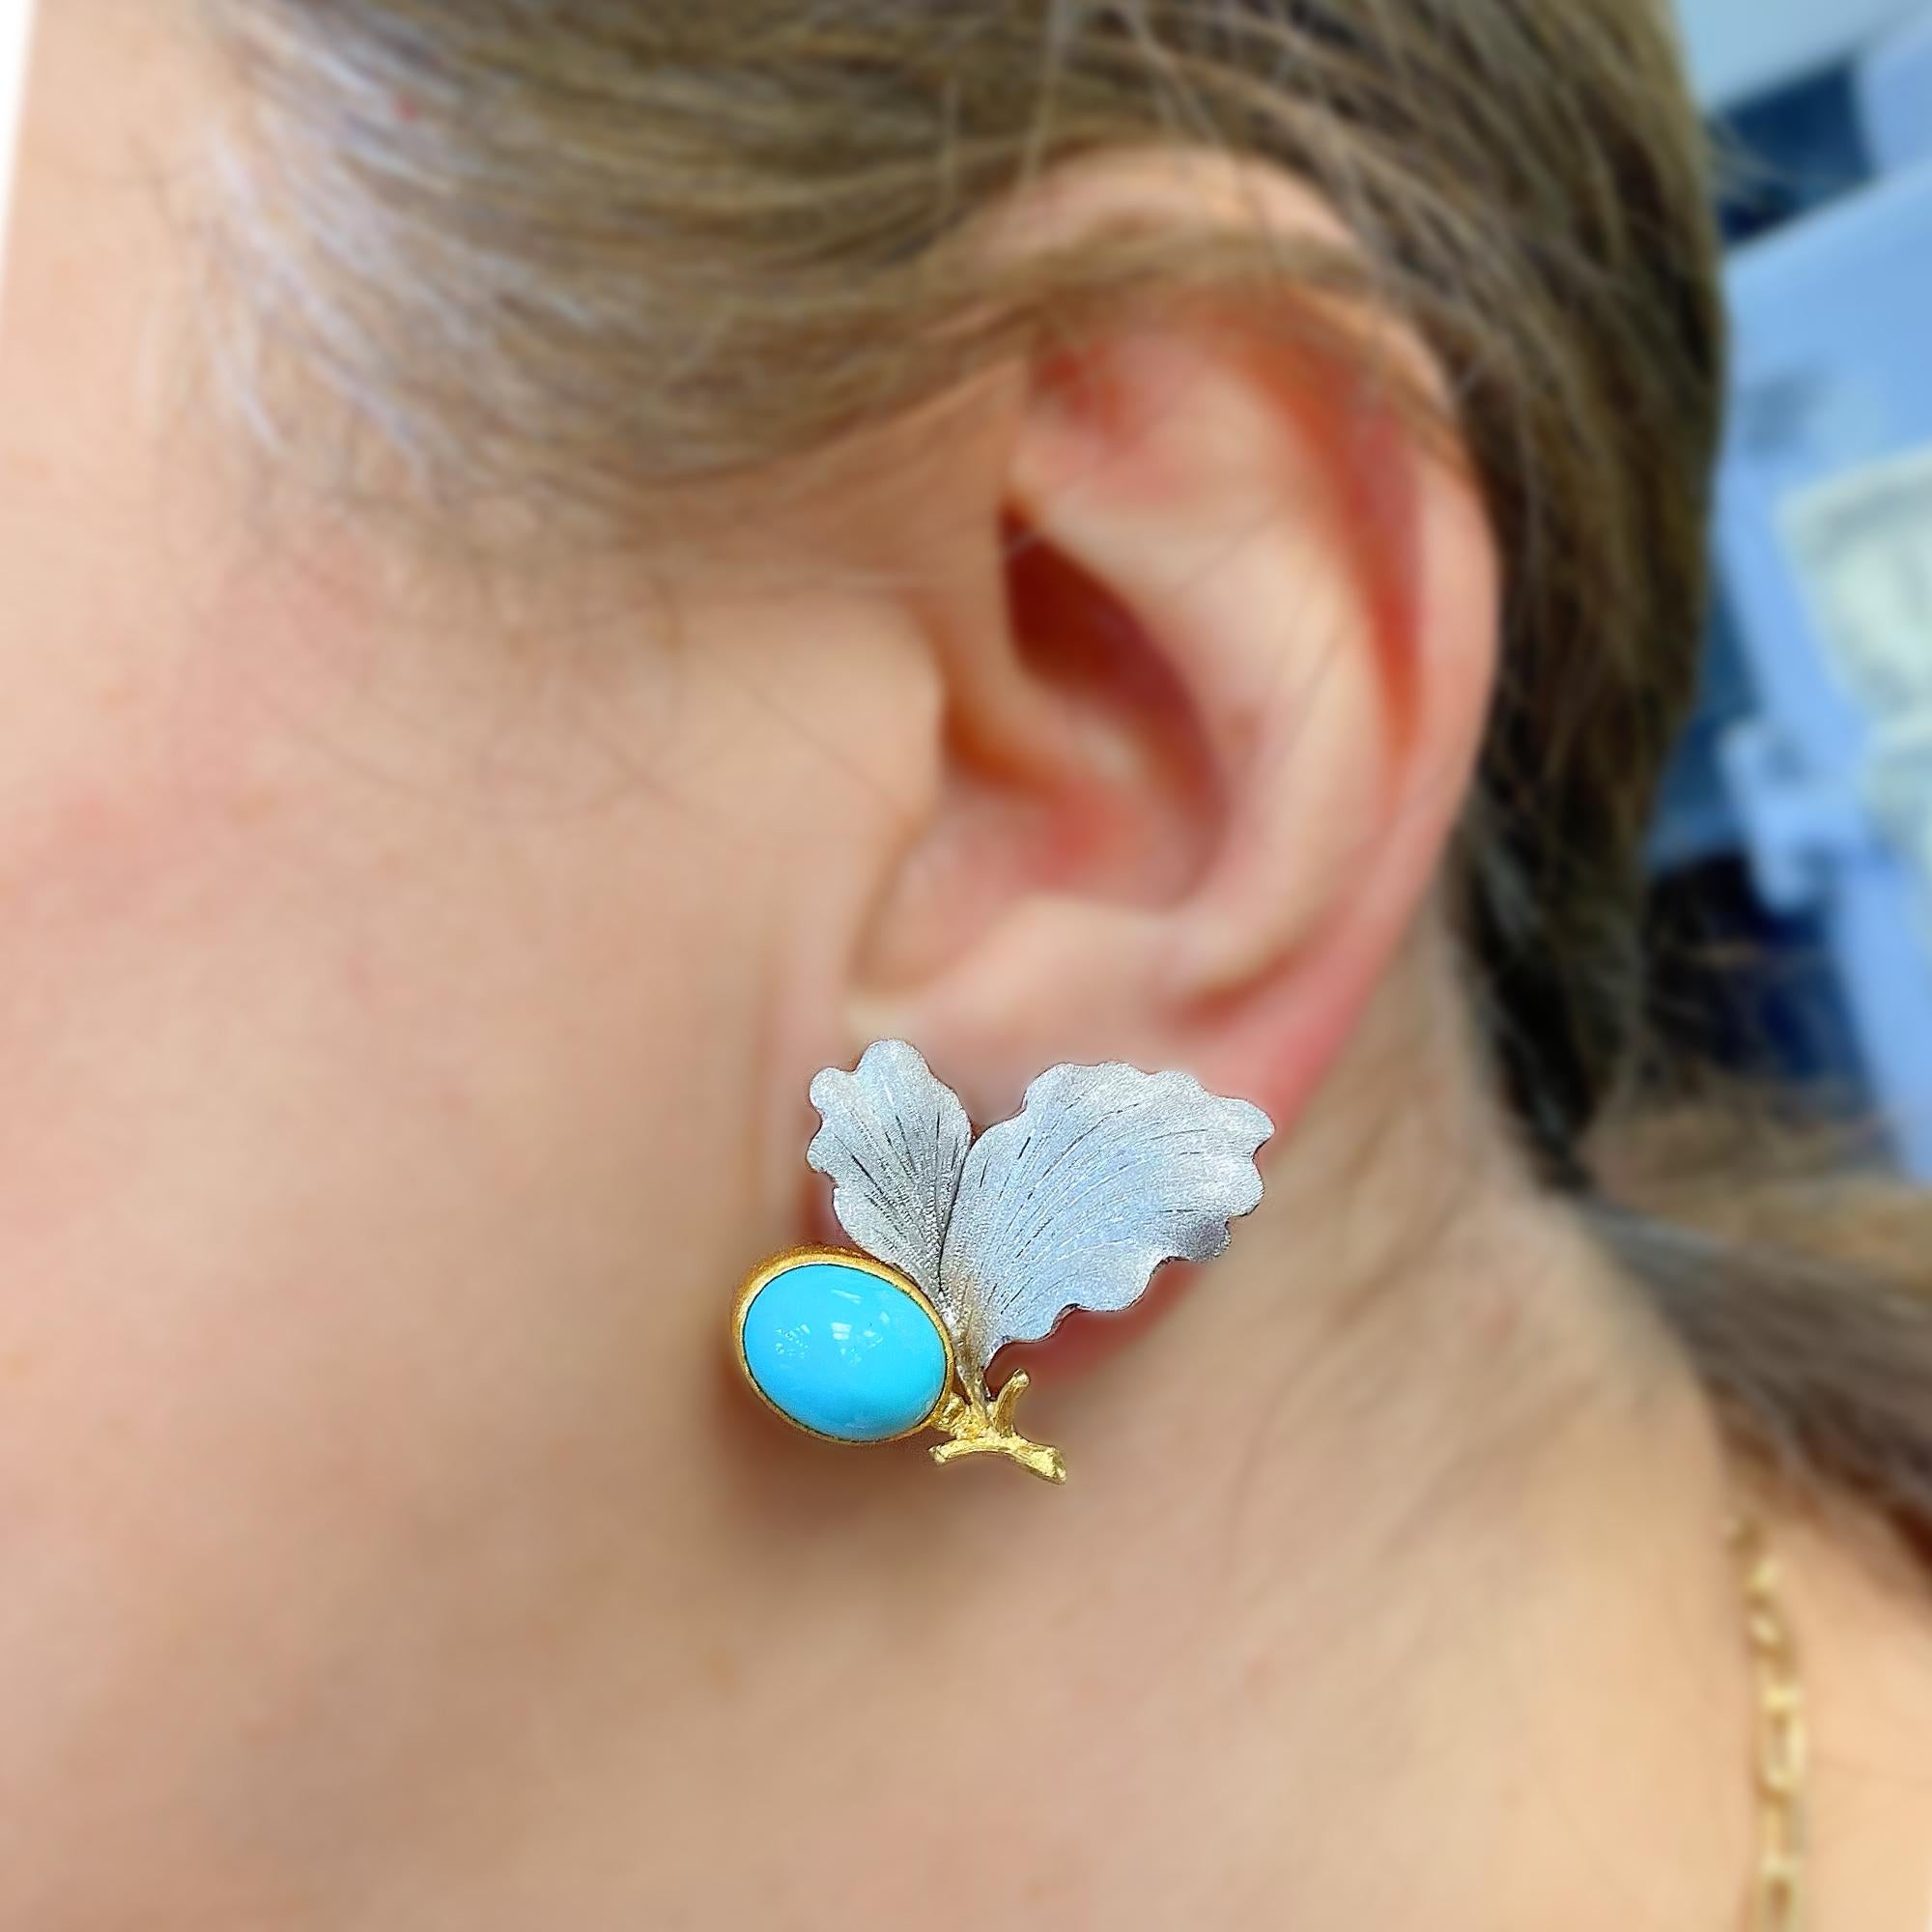 Buccellati 18K White Yellow Gold Turquoise Floral Leaf Motif Earrings

These state-of-the-art earrings by Buccellati are a masterpiece with the leaves done in 18k white gold with a satin finish and Turquoise centers.

Earrings are 0.98 inch from top